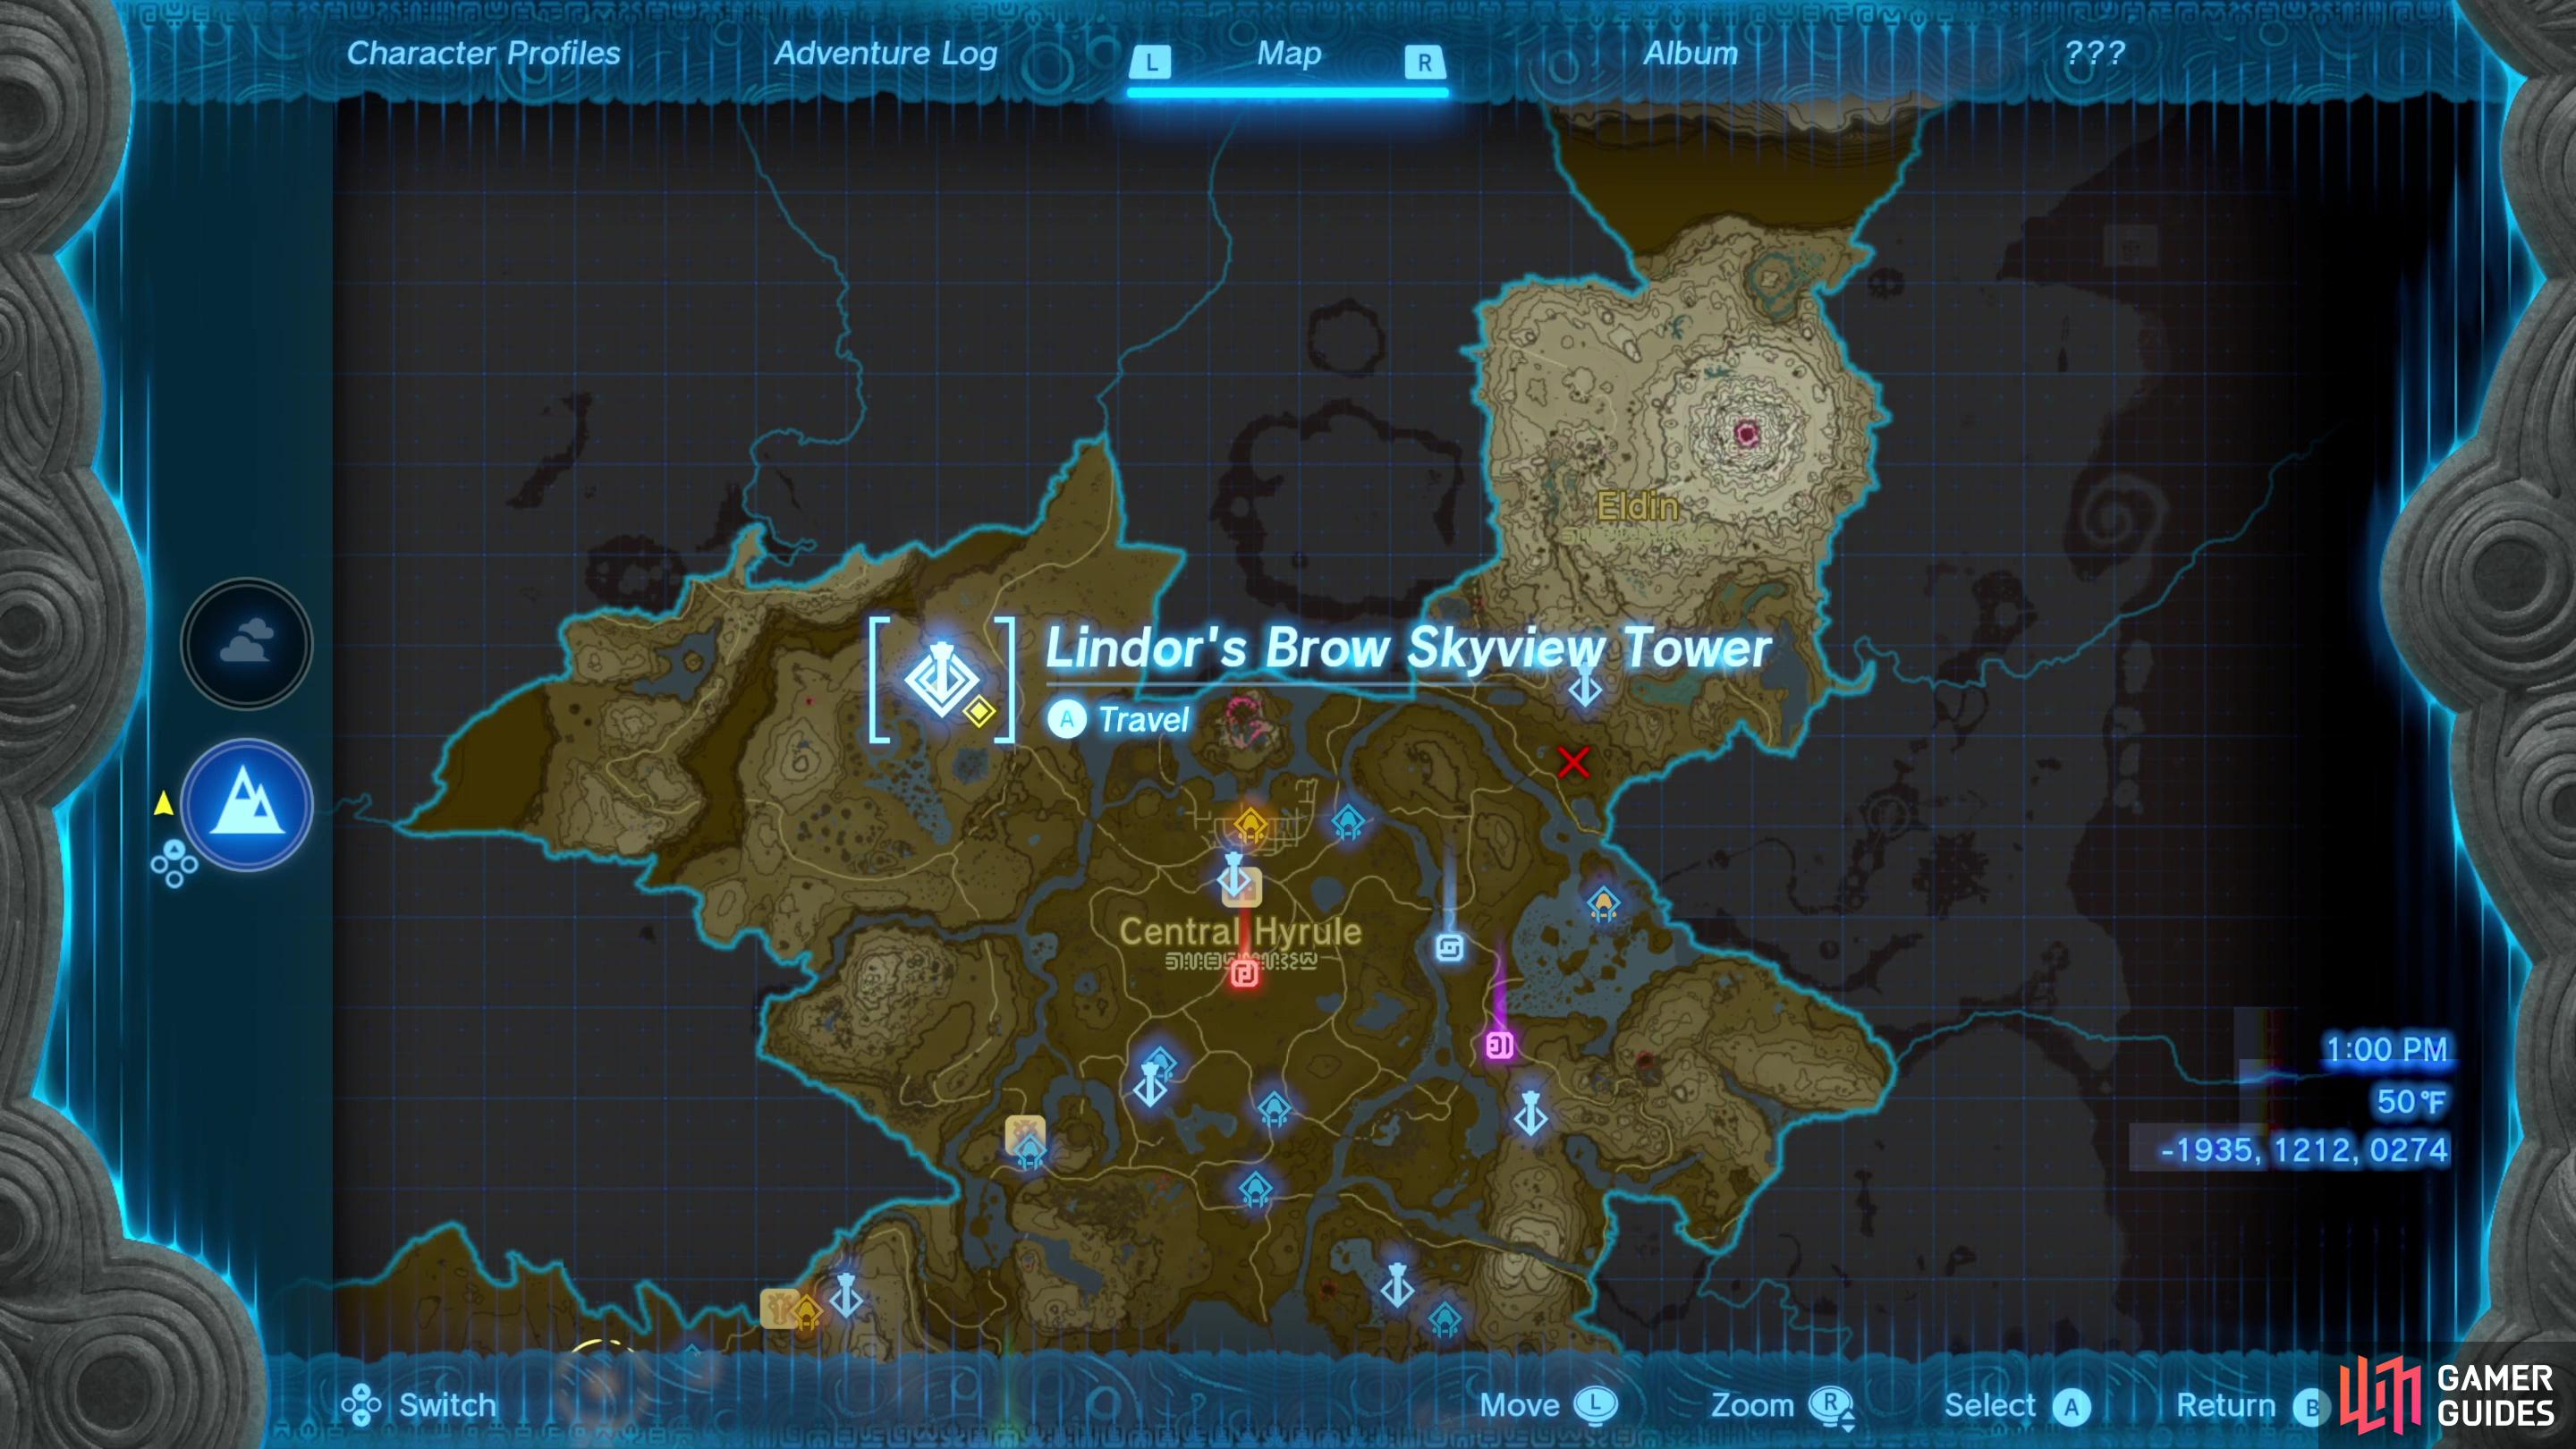 You can find Lindor’s Brow Skyview Tower northwest of Lookout Landing.